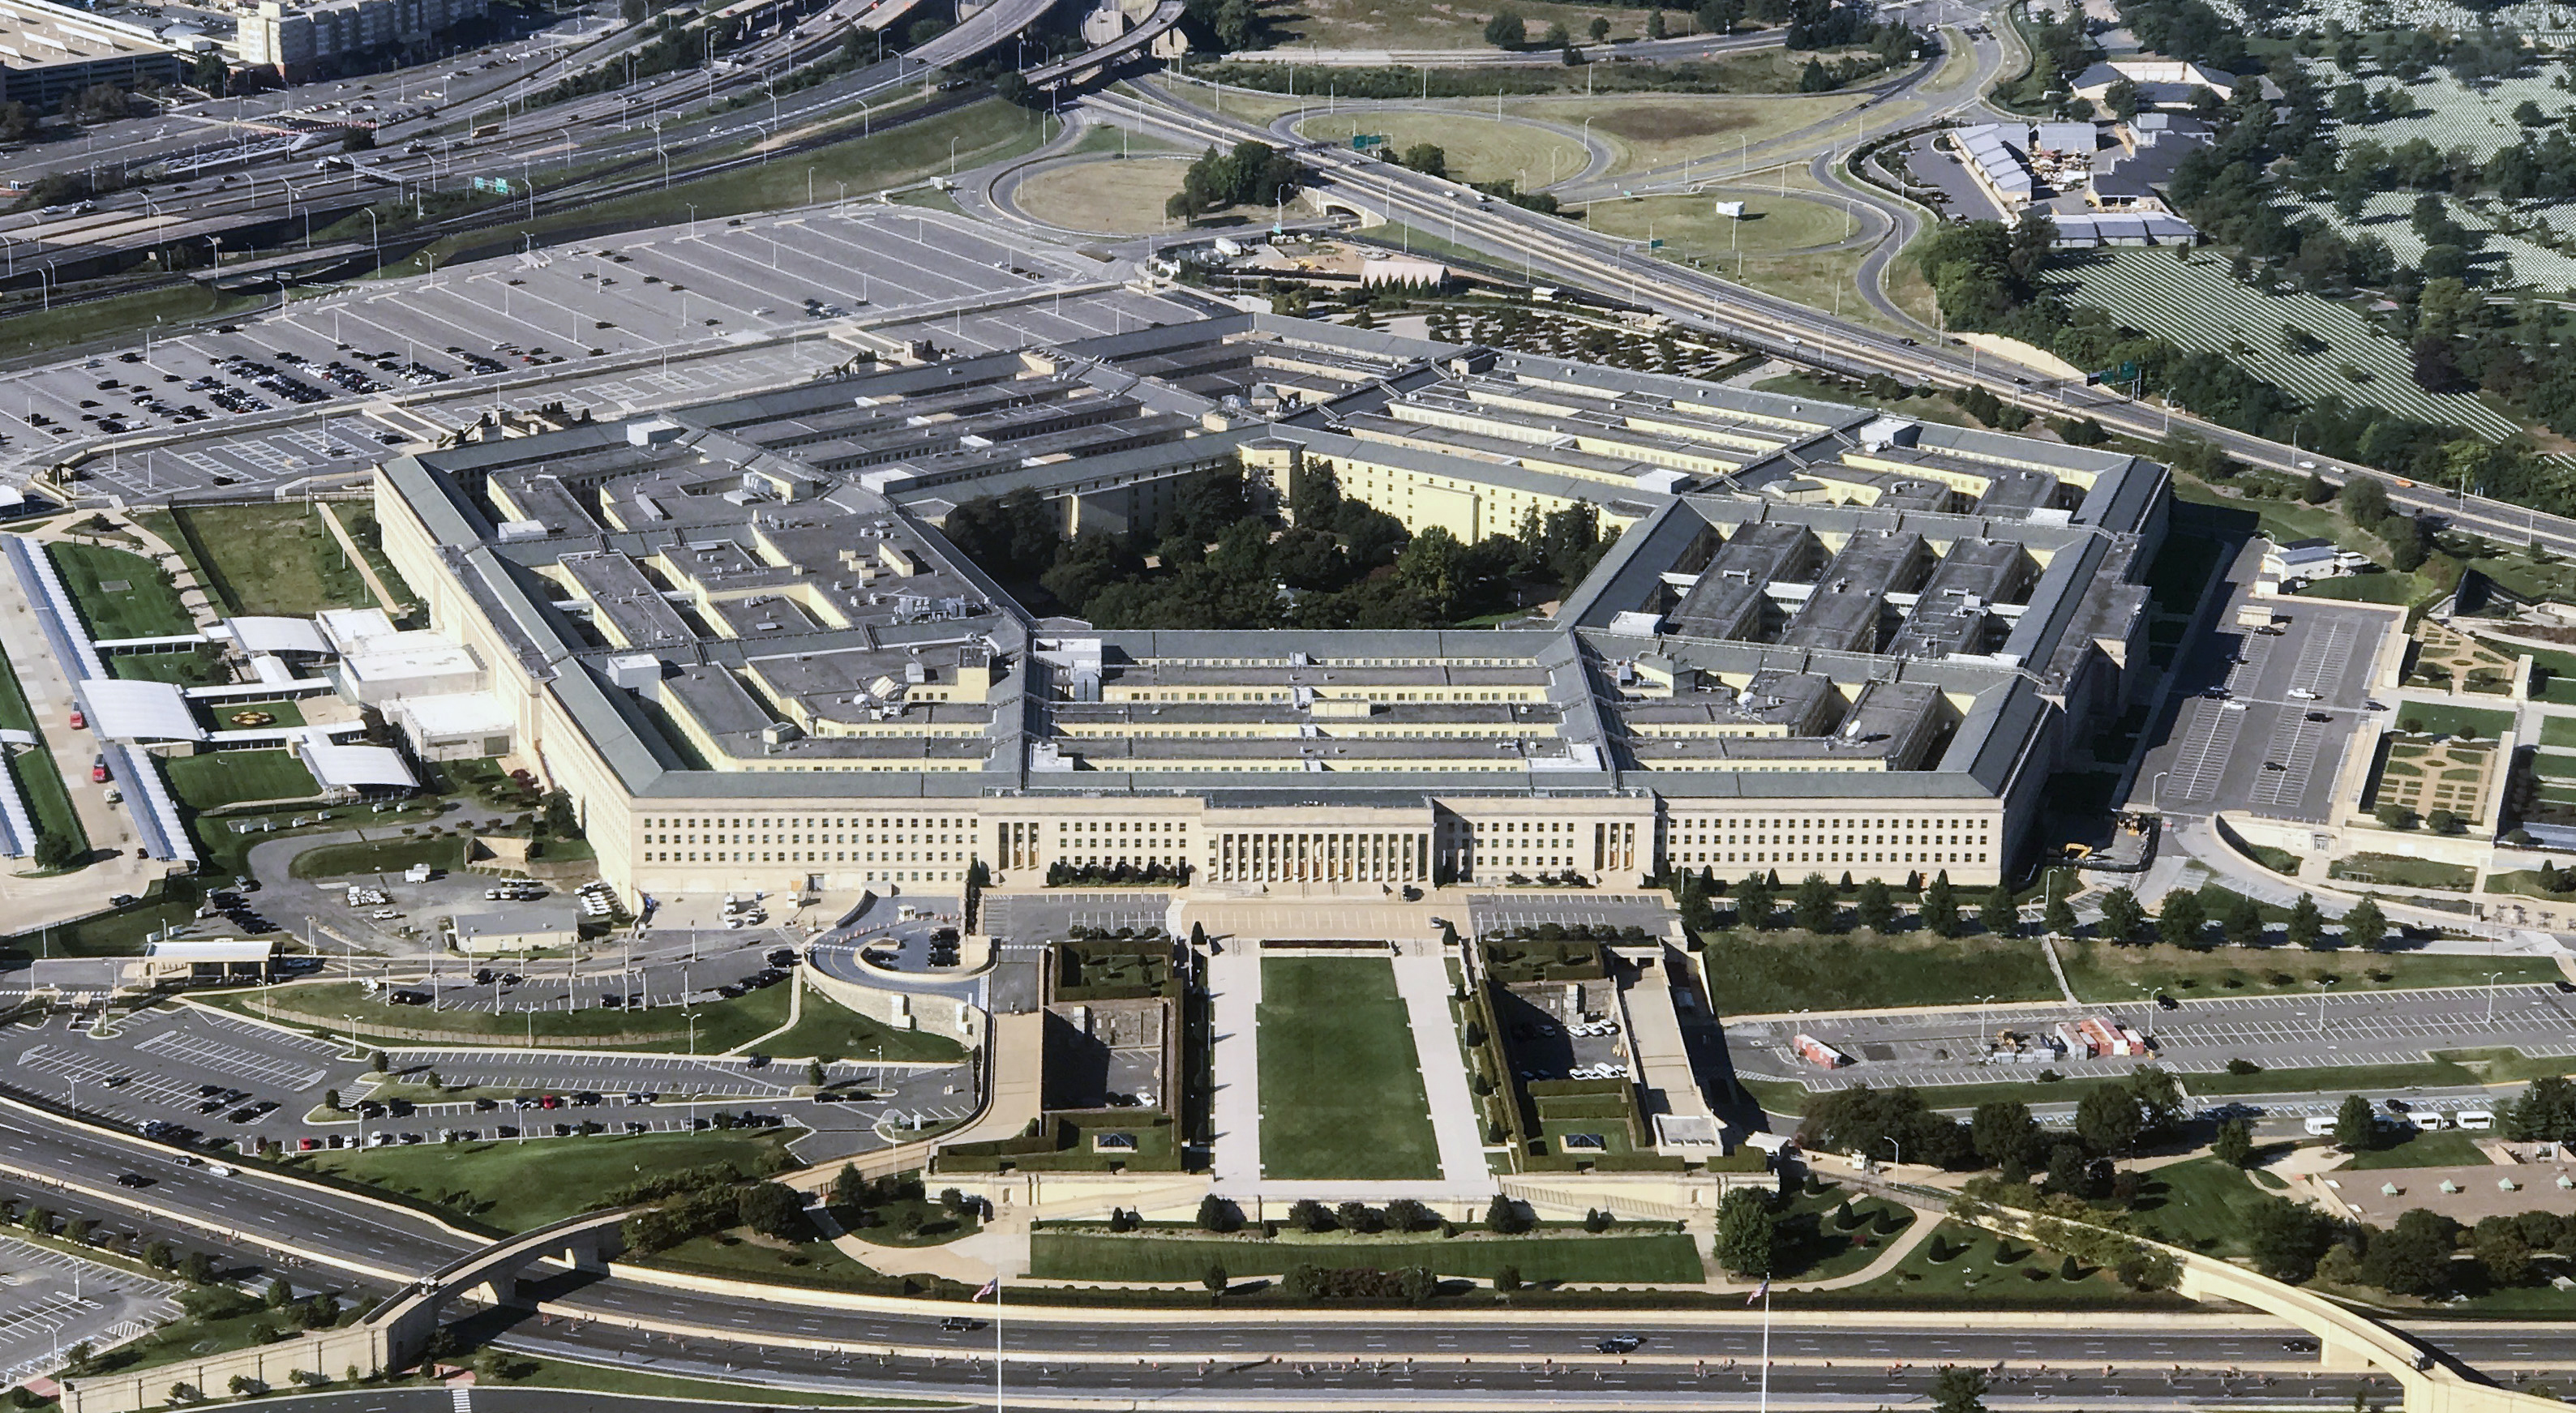 The Pentagon building. Two members of the elite Navy SEAL Team 6 are under investigation after the death of a U.S. Army Green Beret in Mali (Bill Clark—AP)